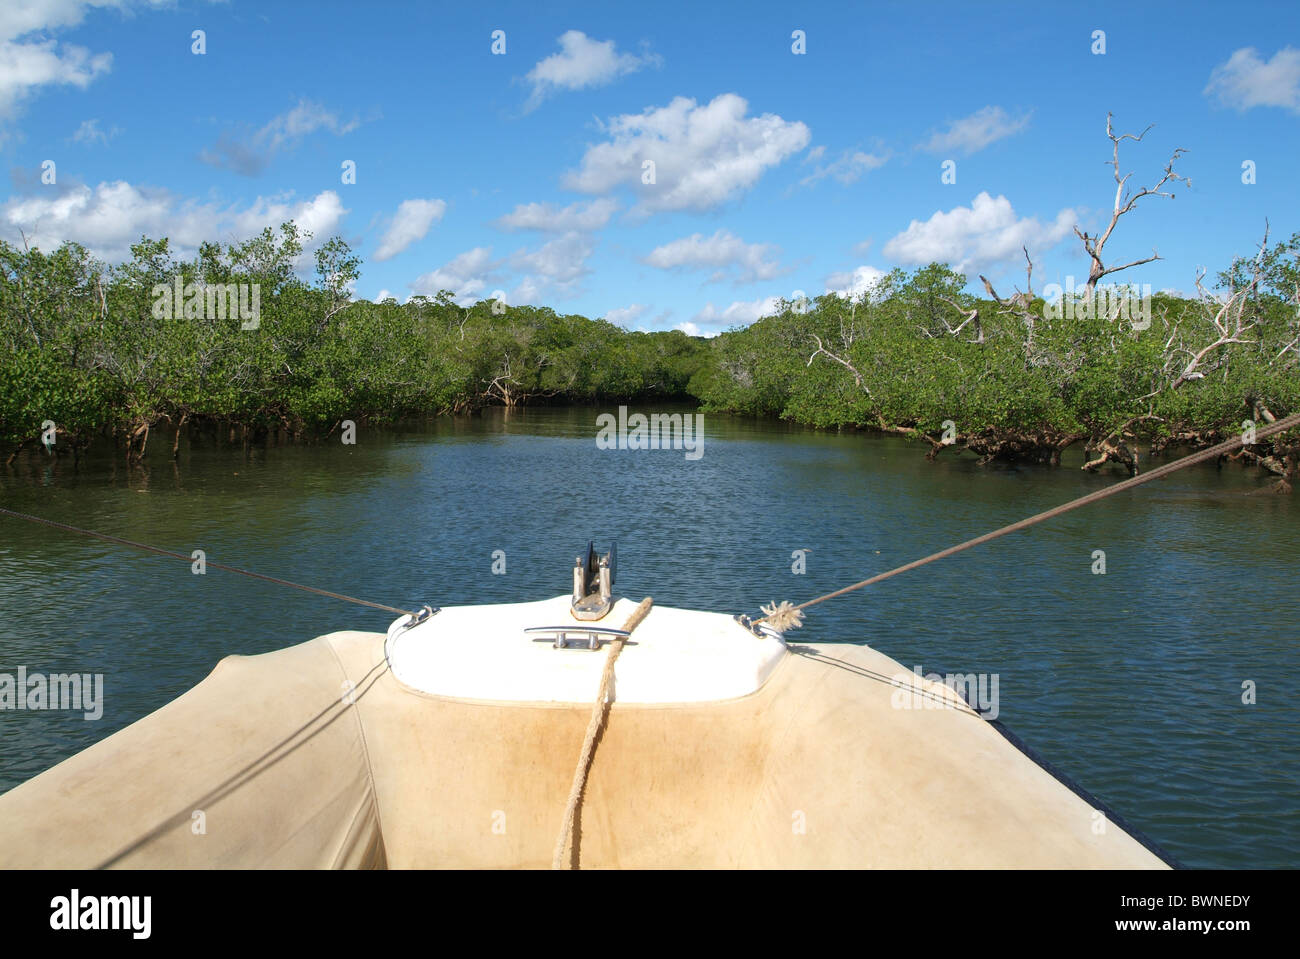 Mayotte France Europe Overseas collectivity Indian Ocean Comoros islands island landscape nature mangrove for Stock Photo